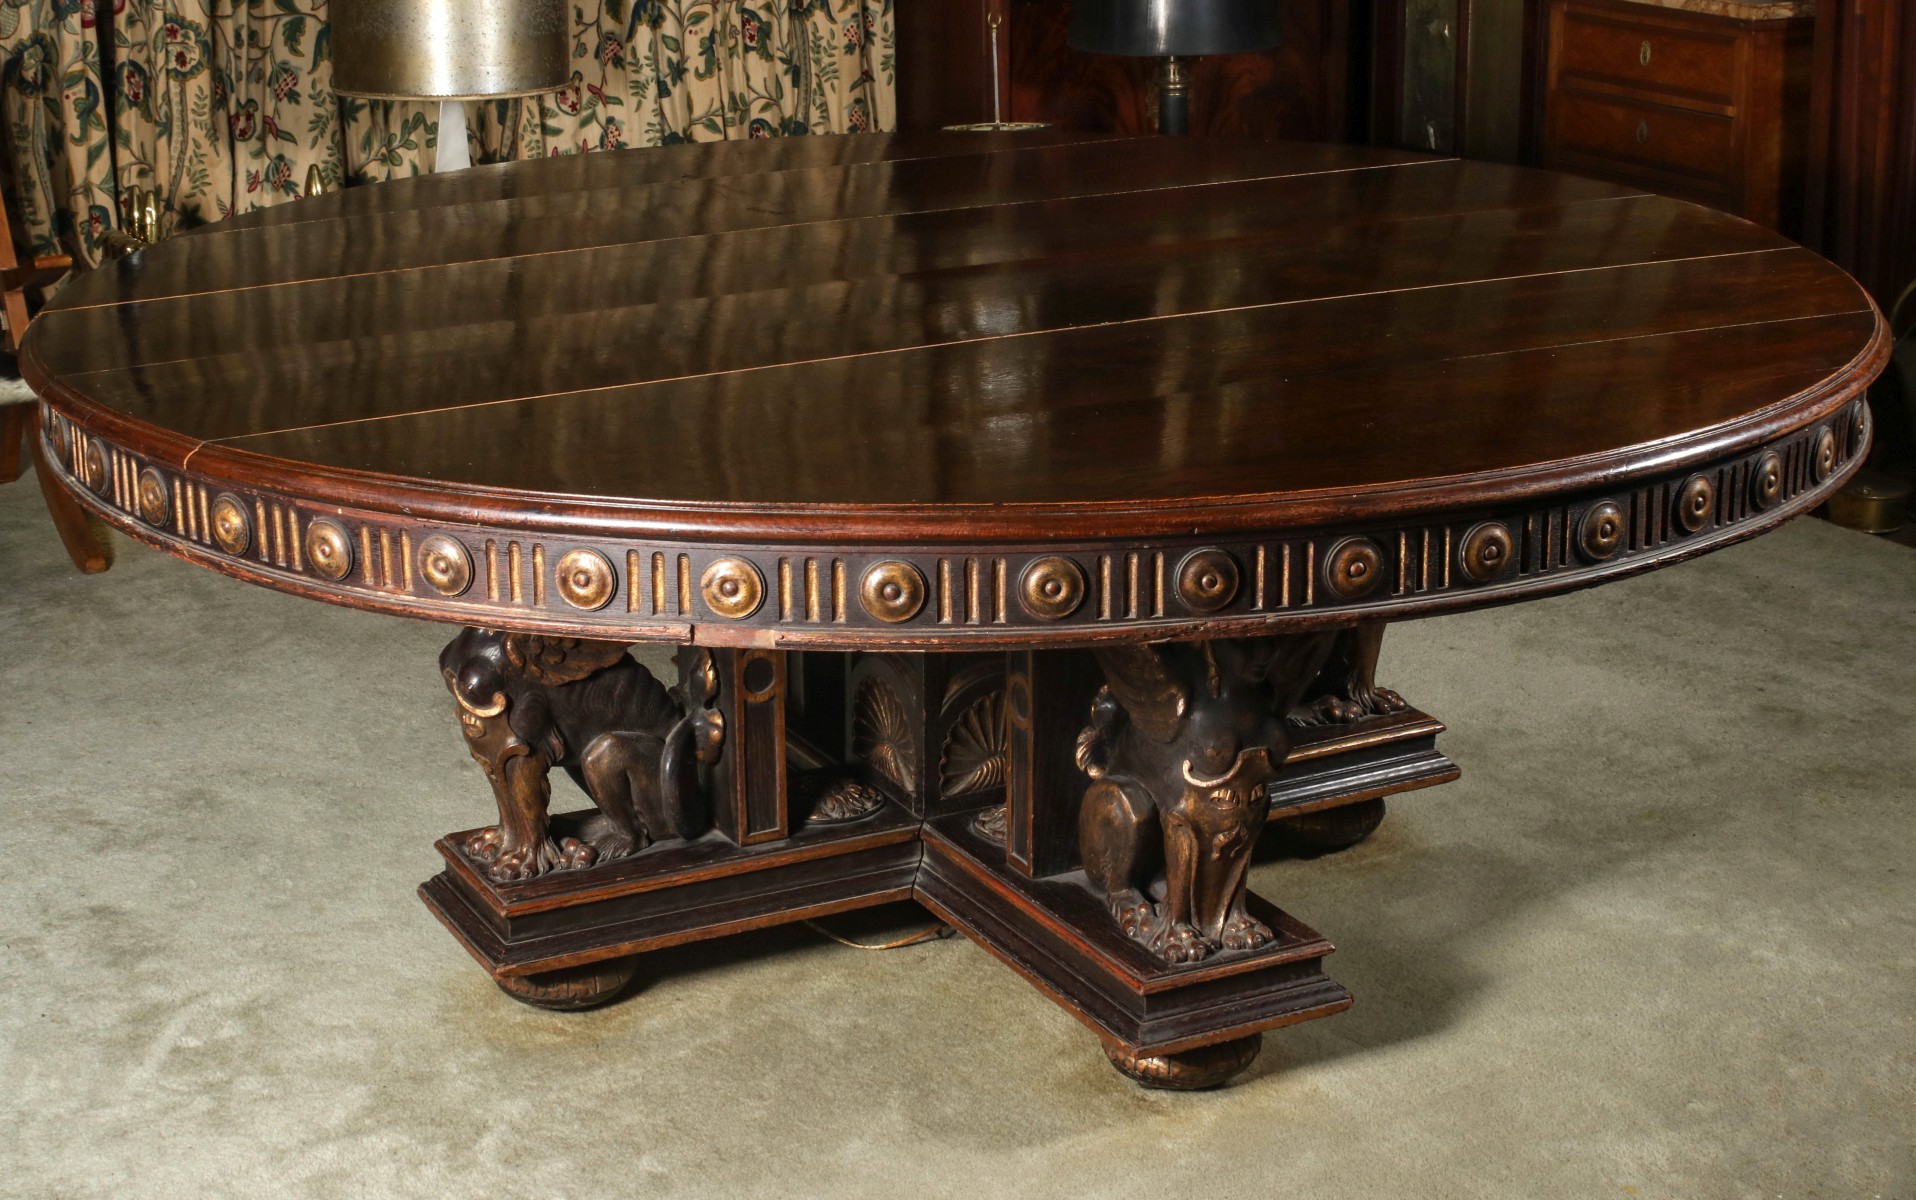 A MASSIVE CARVED OAK DINING TABLE WITH FEMALE SPHINX